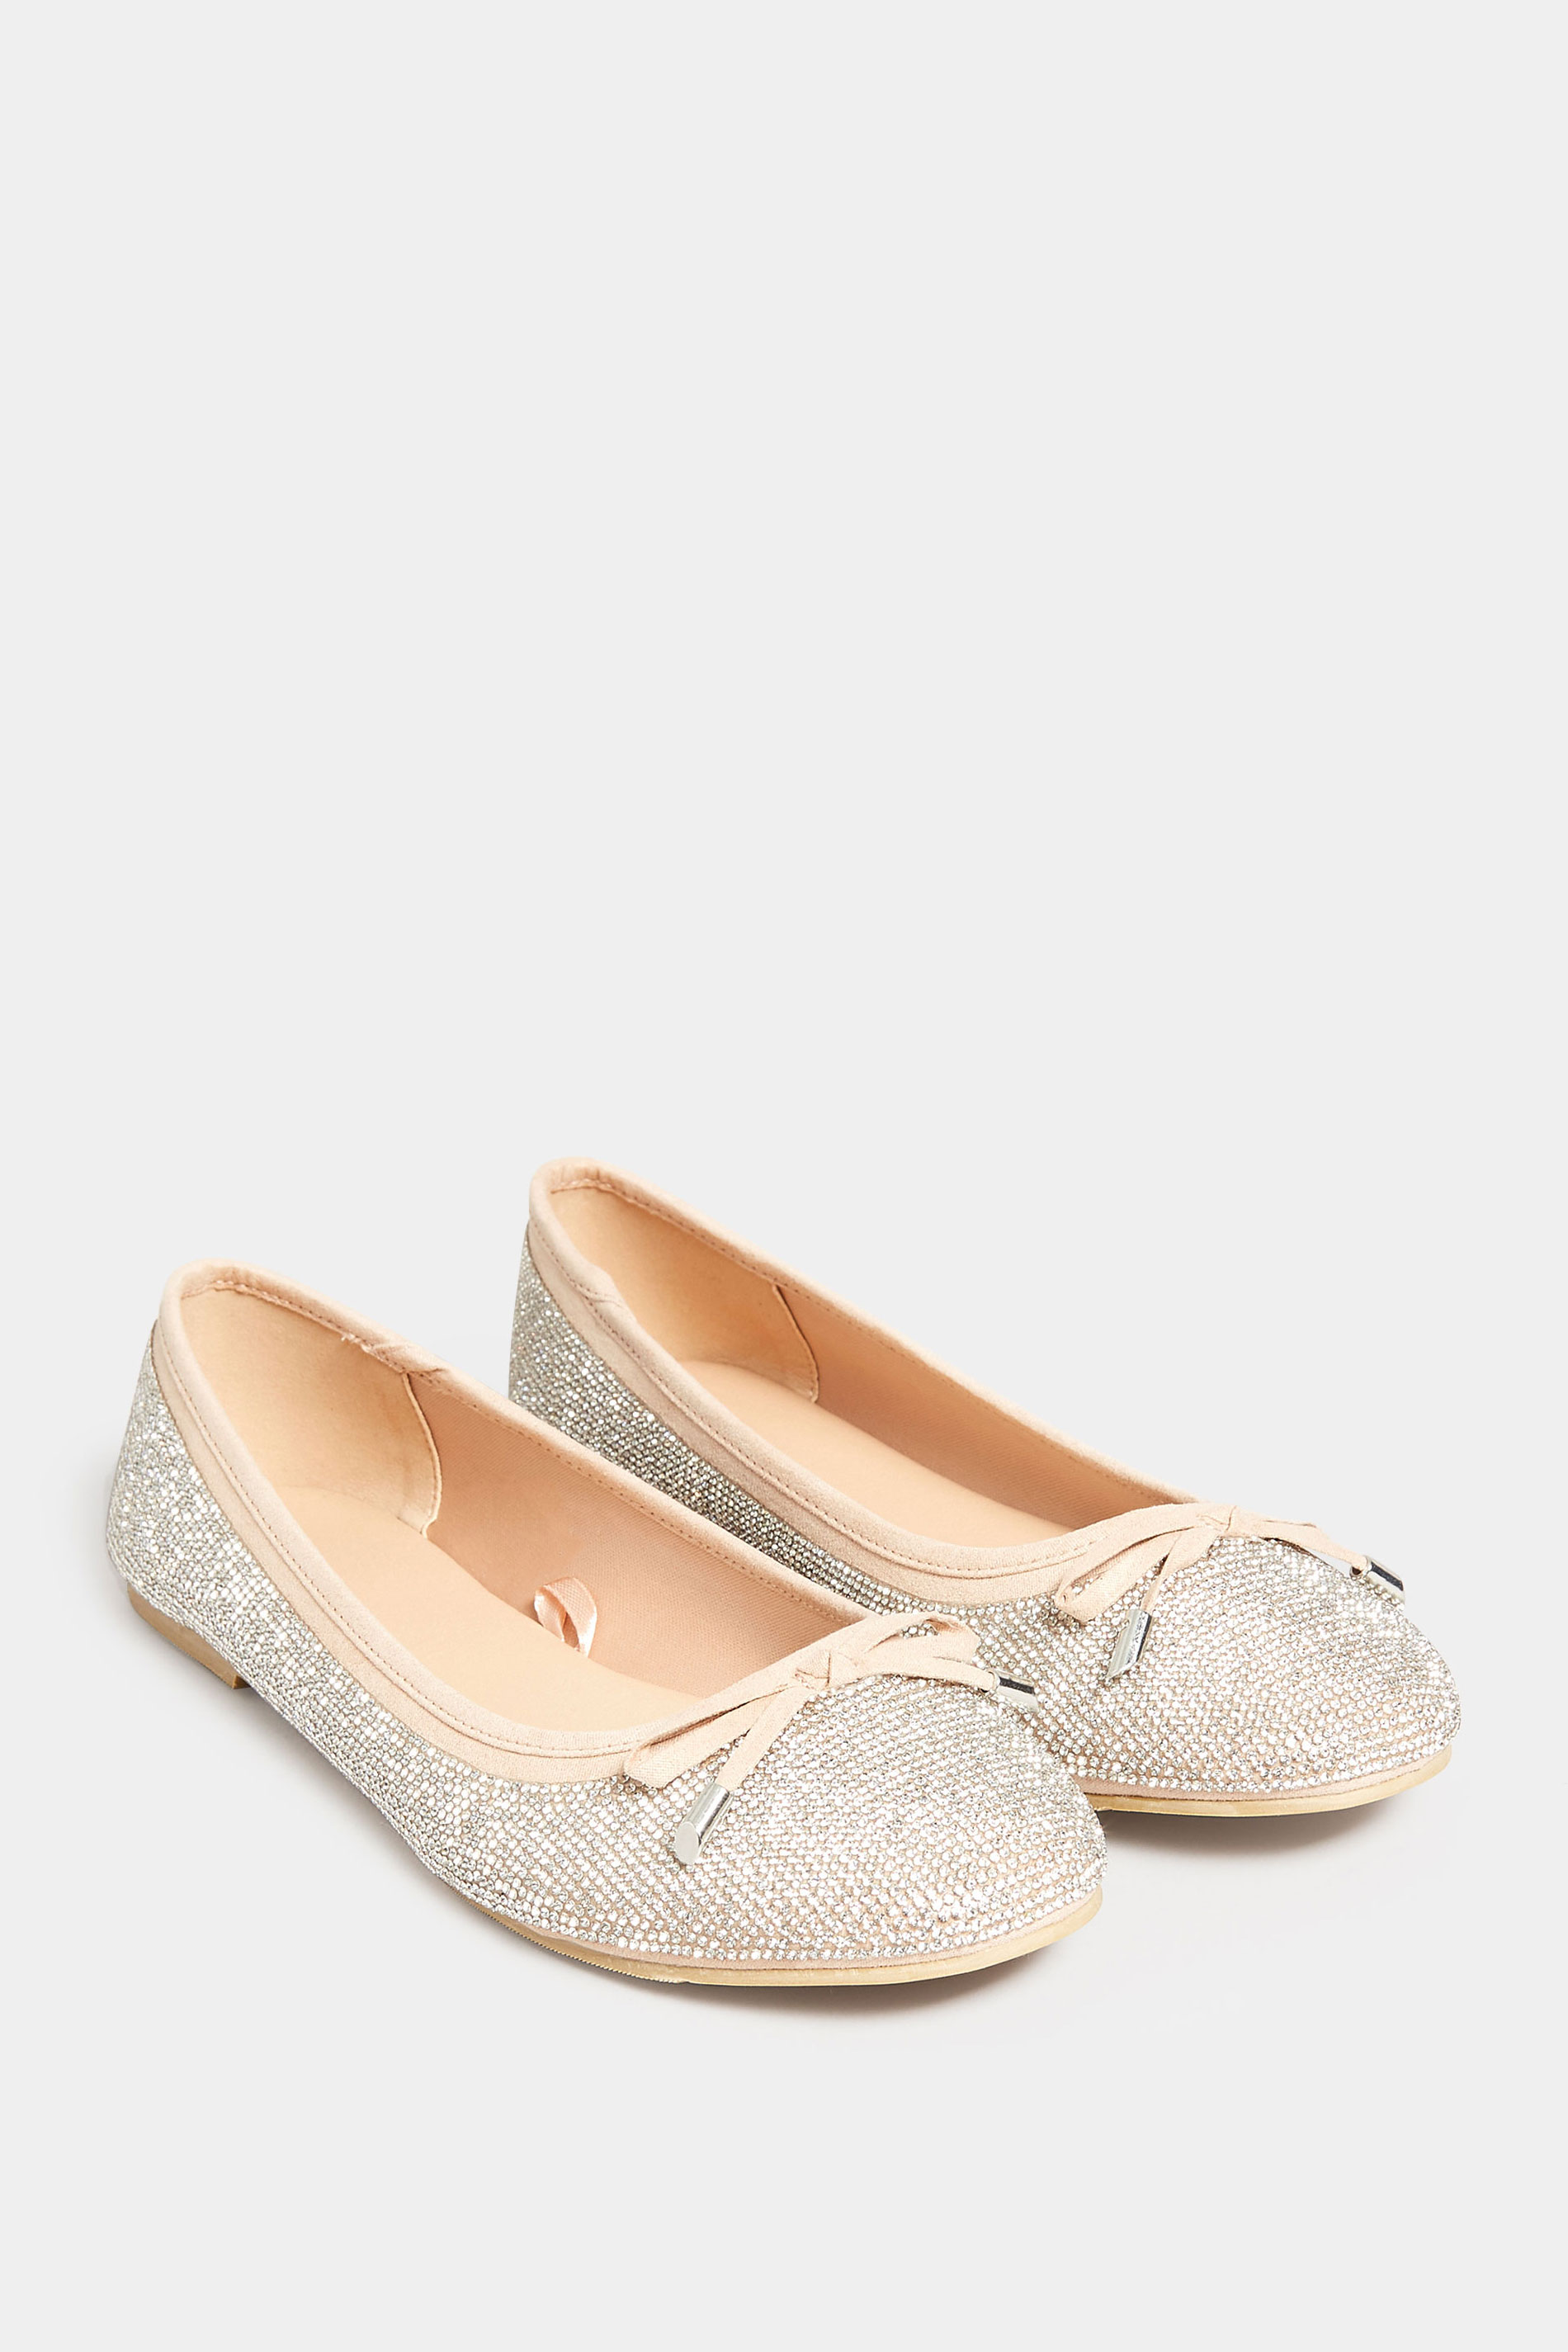 LTS Nude Diamante Embellished Ballerina Pumps In Standard Fit | Long Tall Sally 2